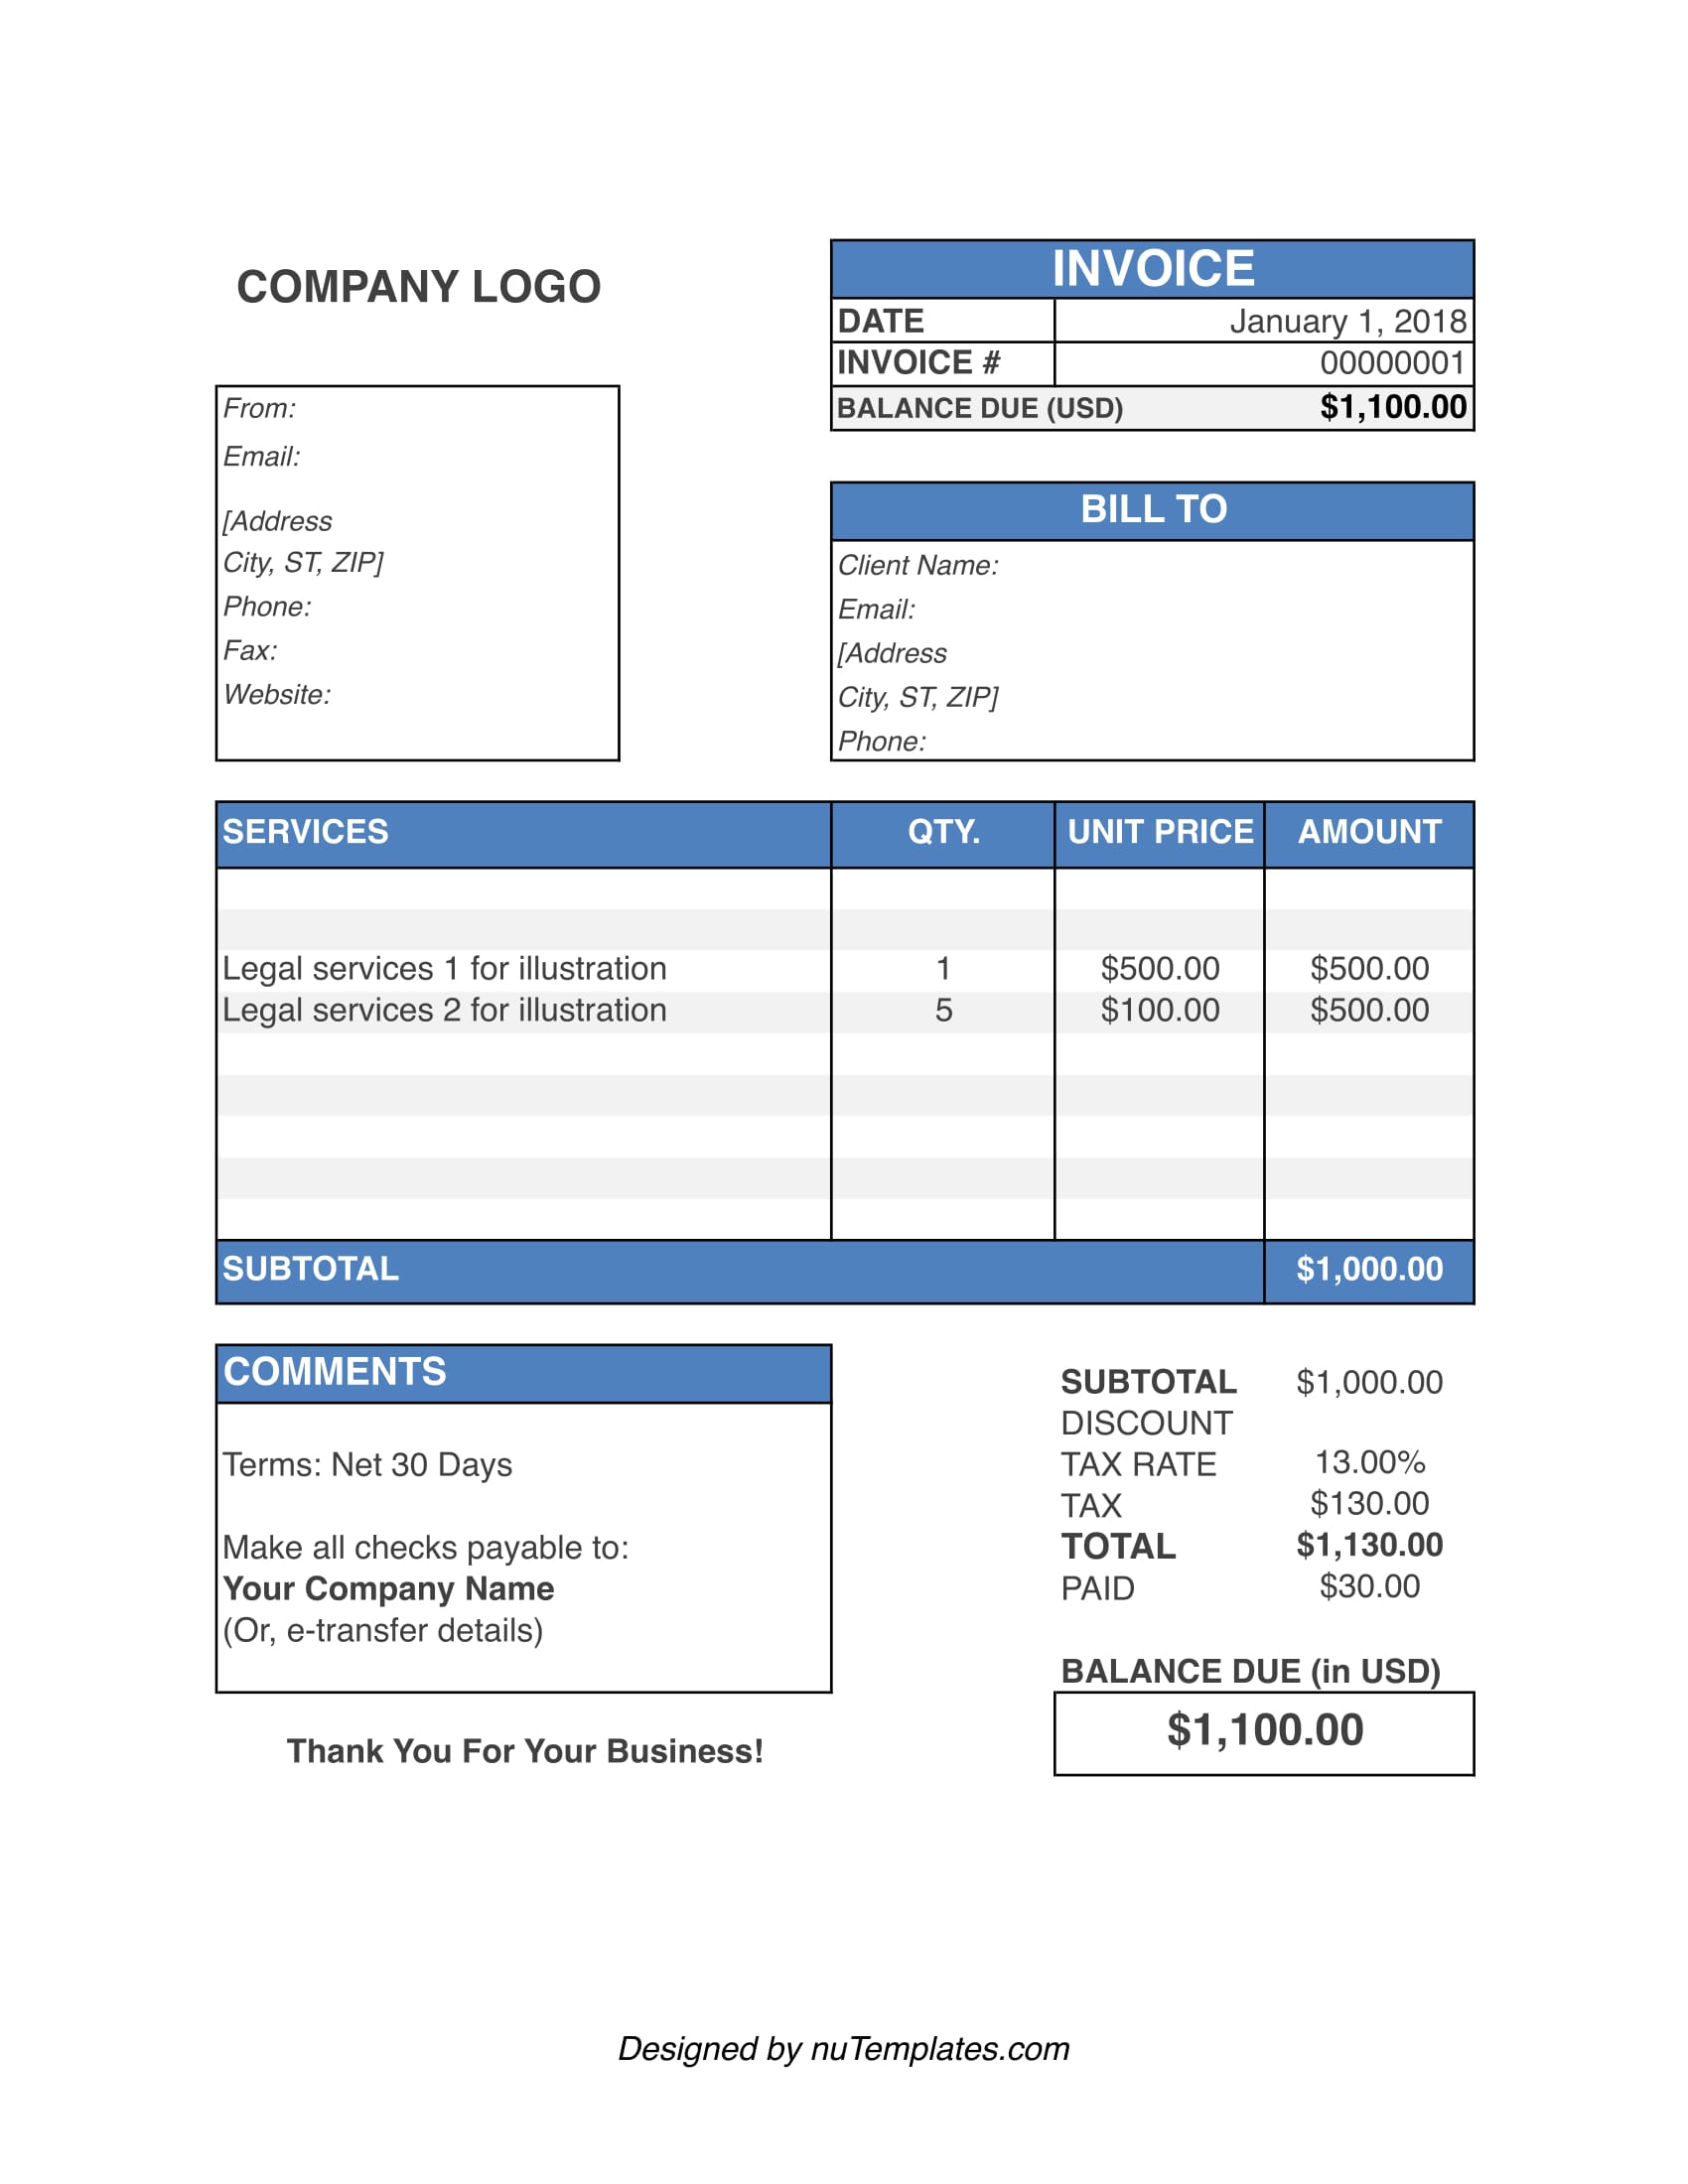 legal invoice template img